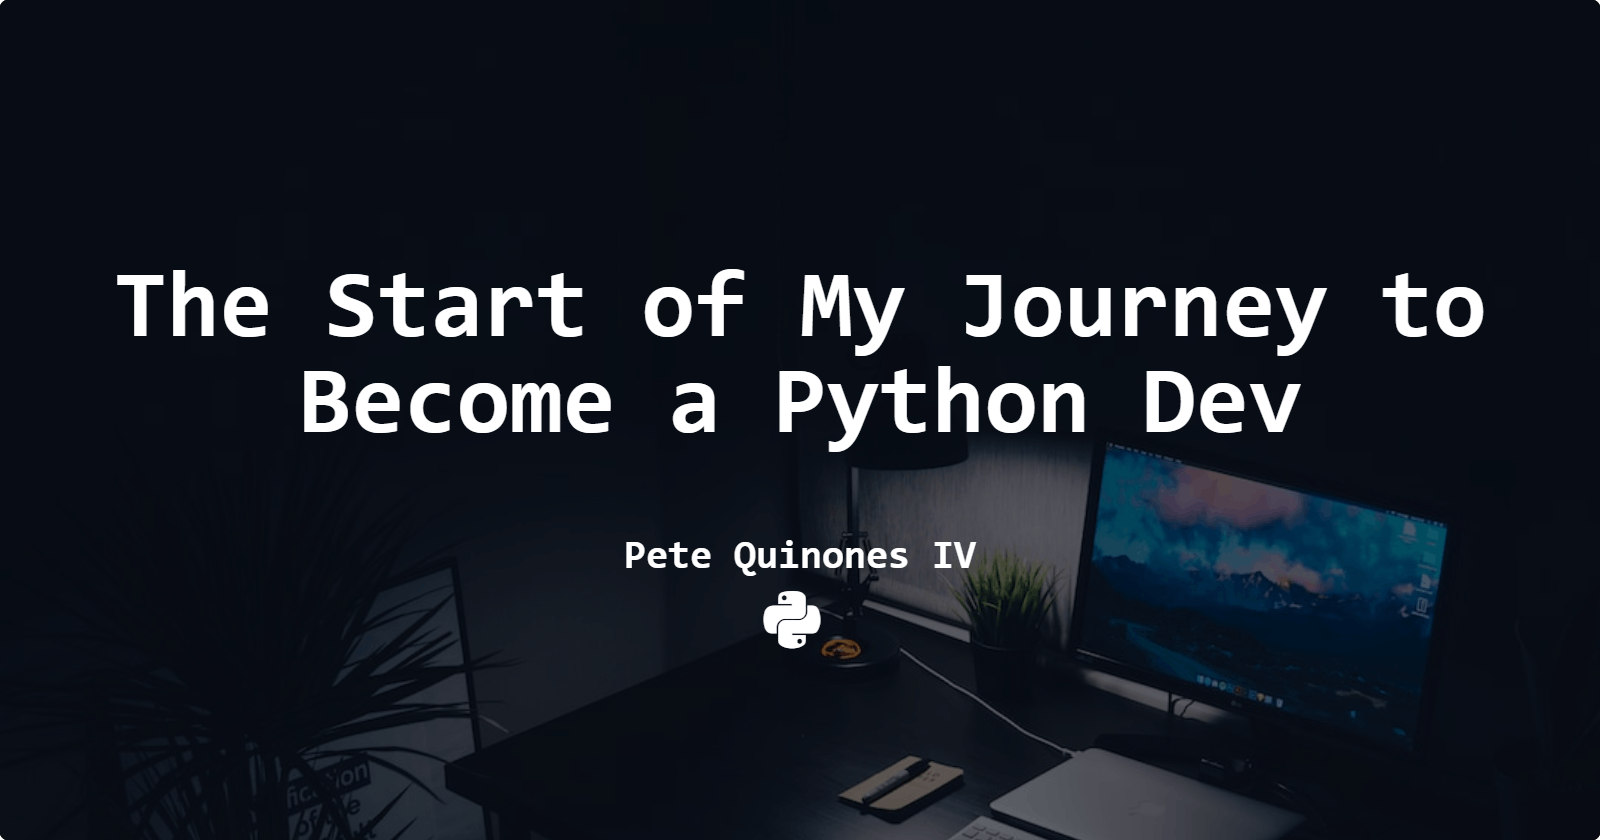 The Start of My Journey to Become a Python Dev